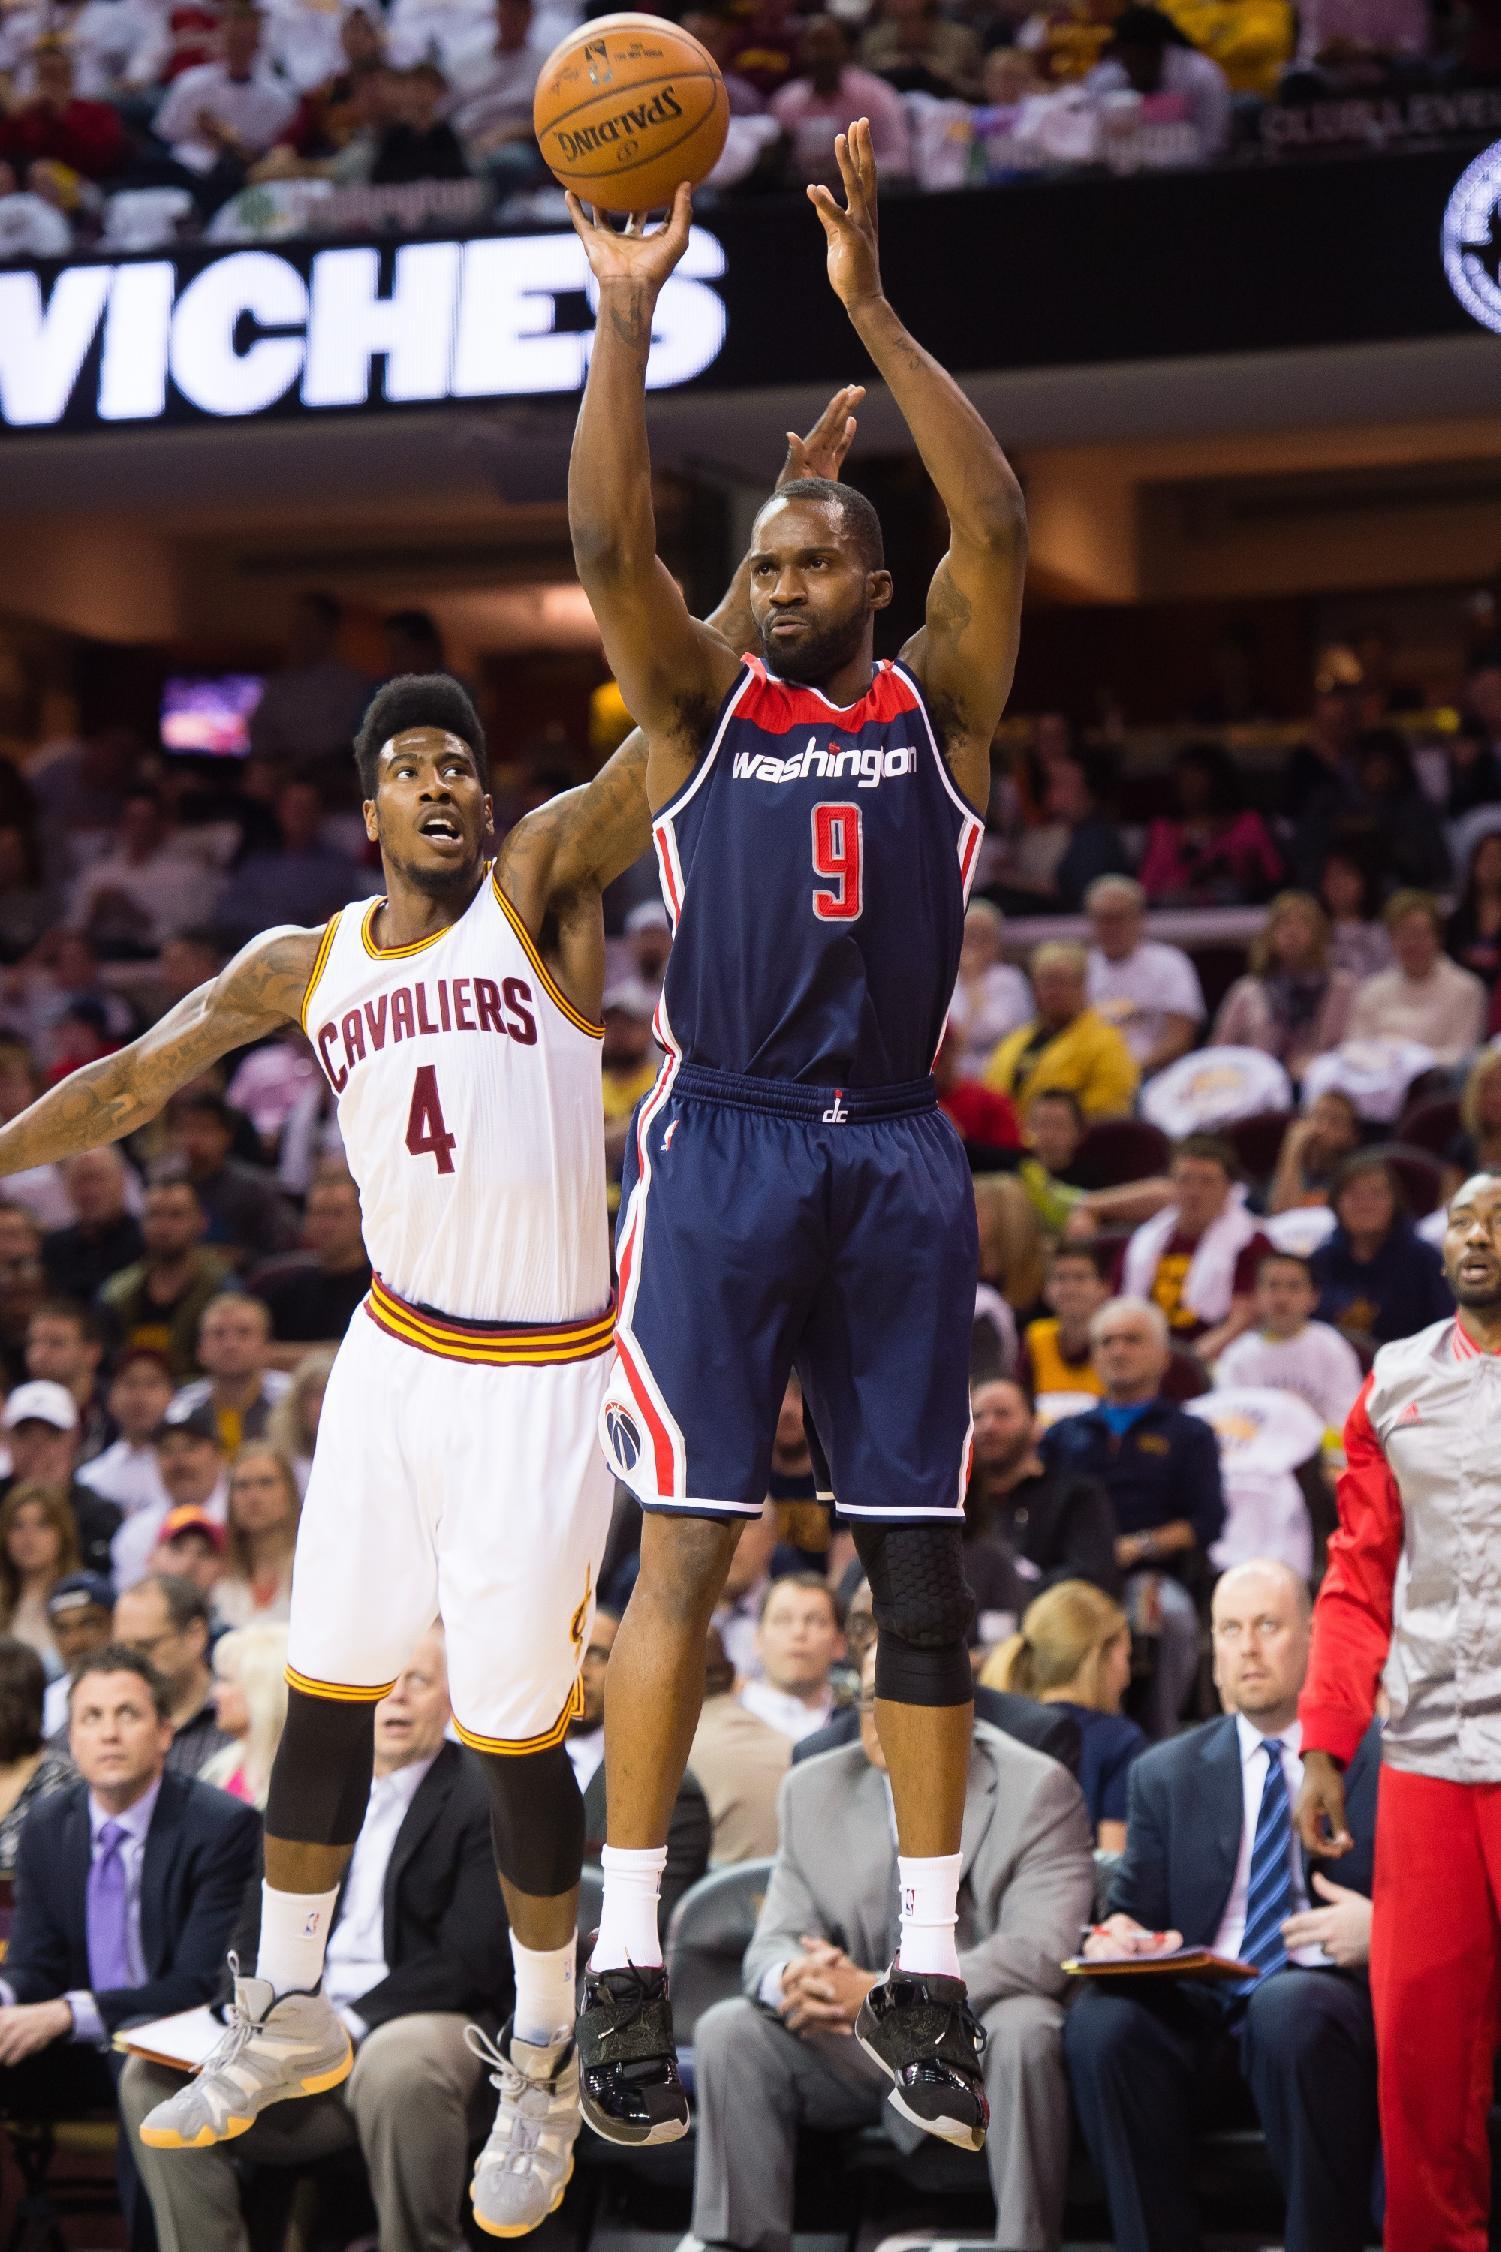 Martell Webster won't be rising and firing for quite a while. (Jason Miller/Getty Images)